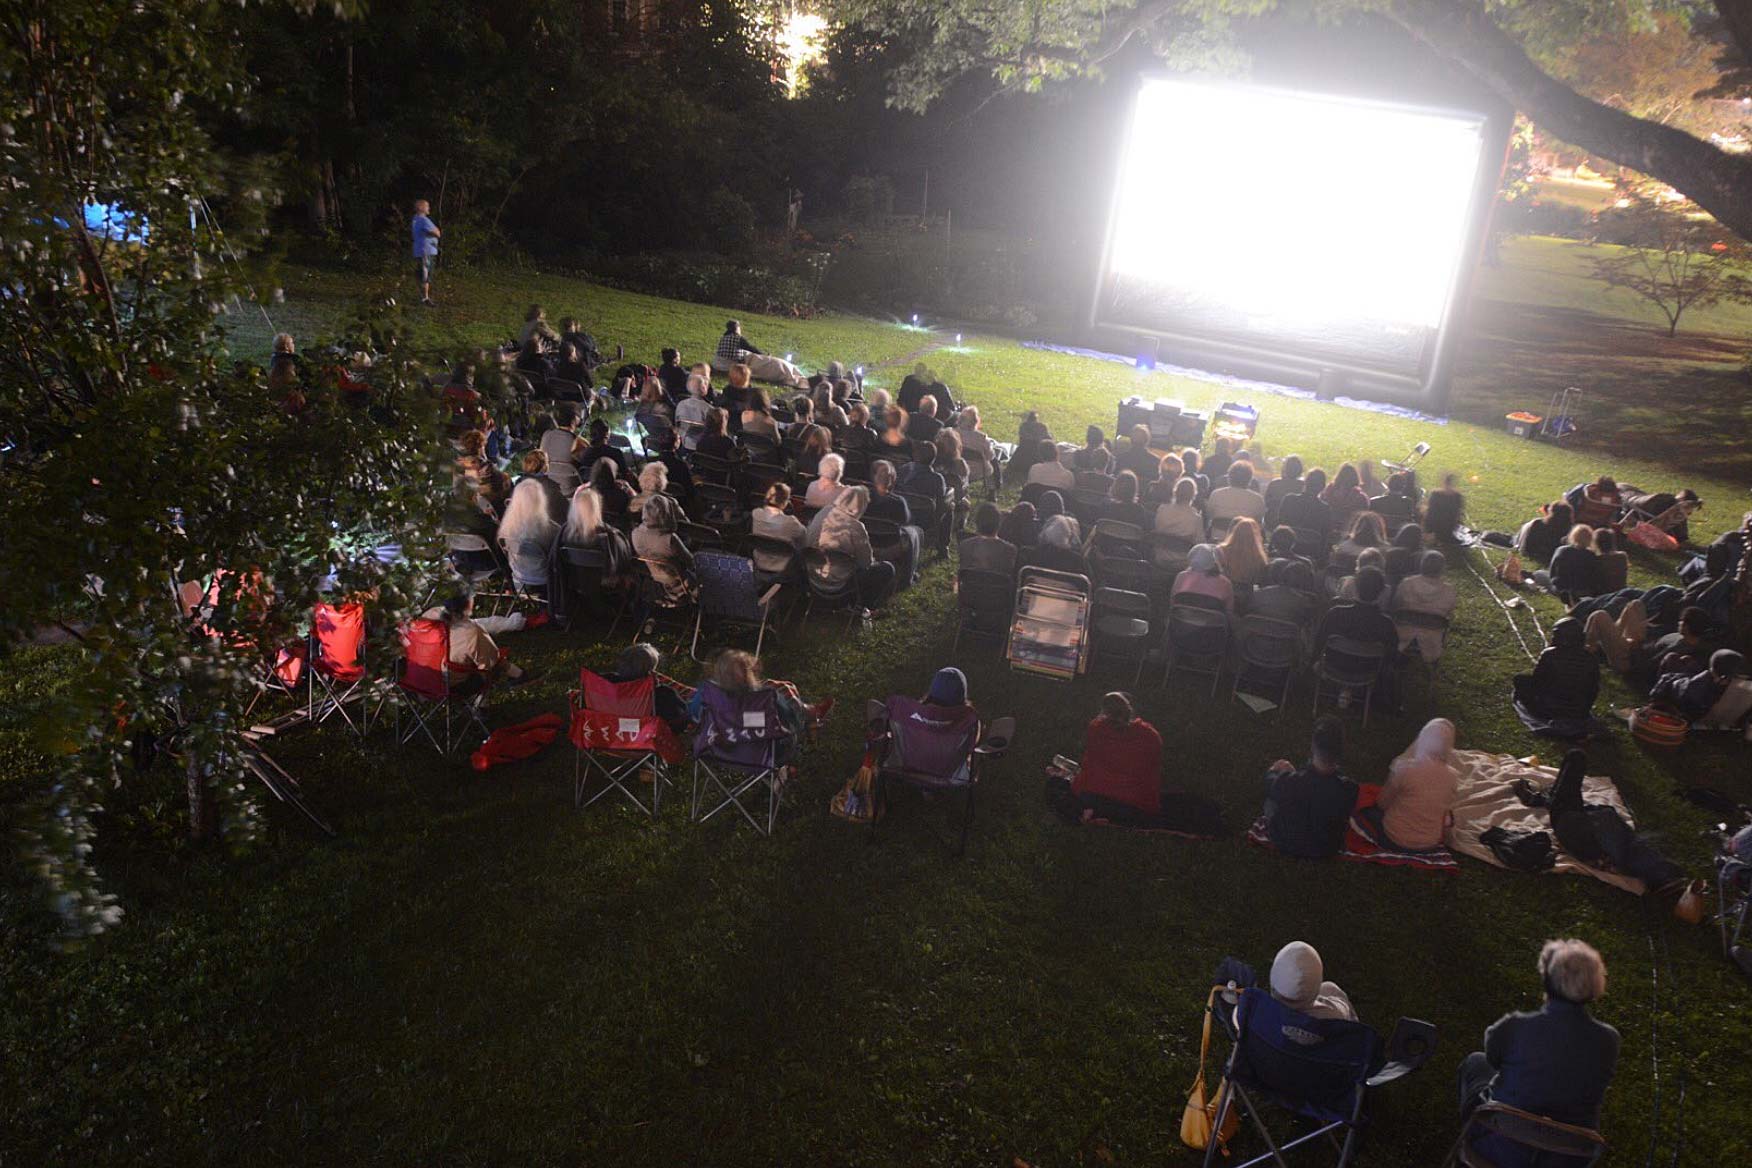 Film screening in the West End Cemetery